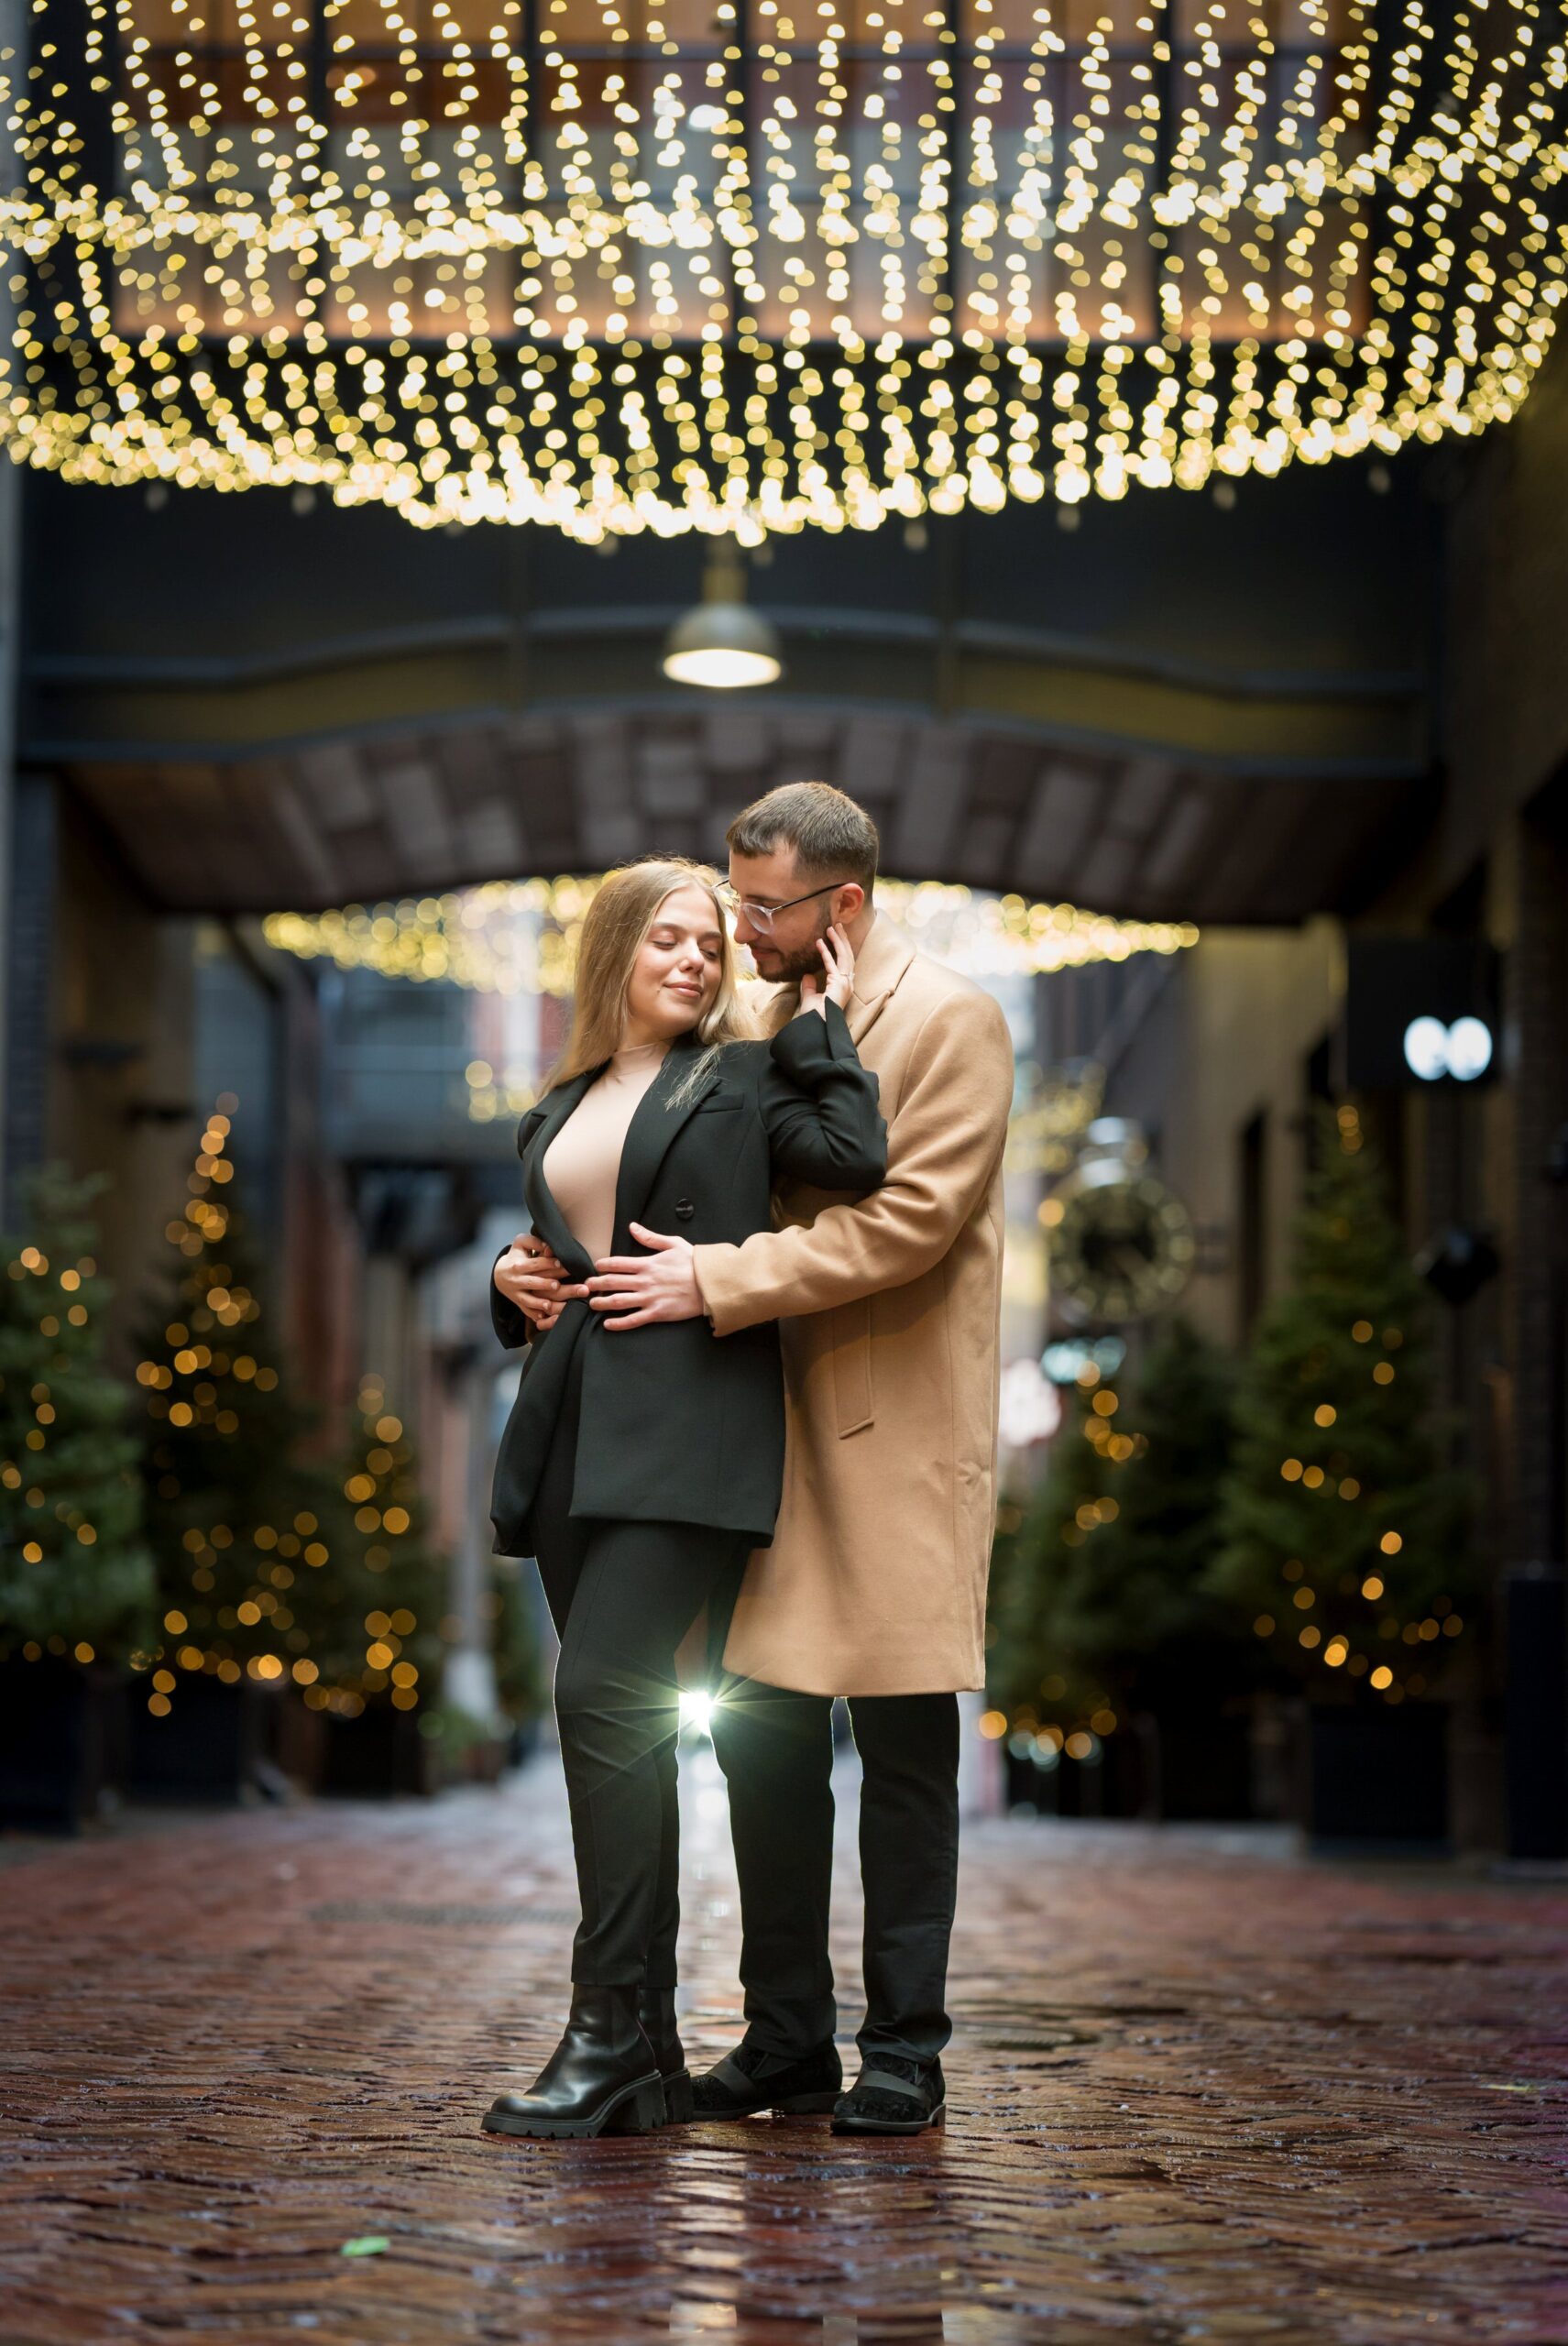 A couple poses under twinkle lights in Parker's Alley following their proposal.  